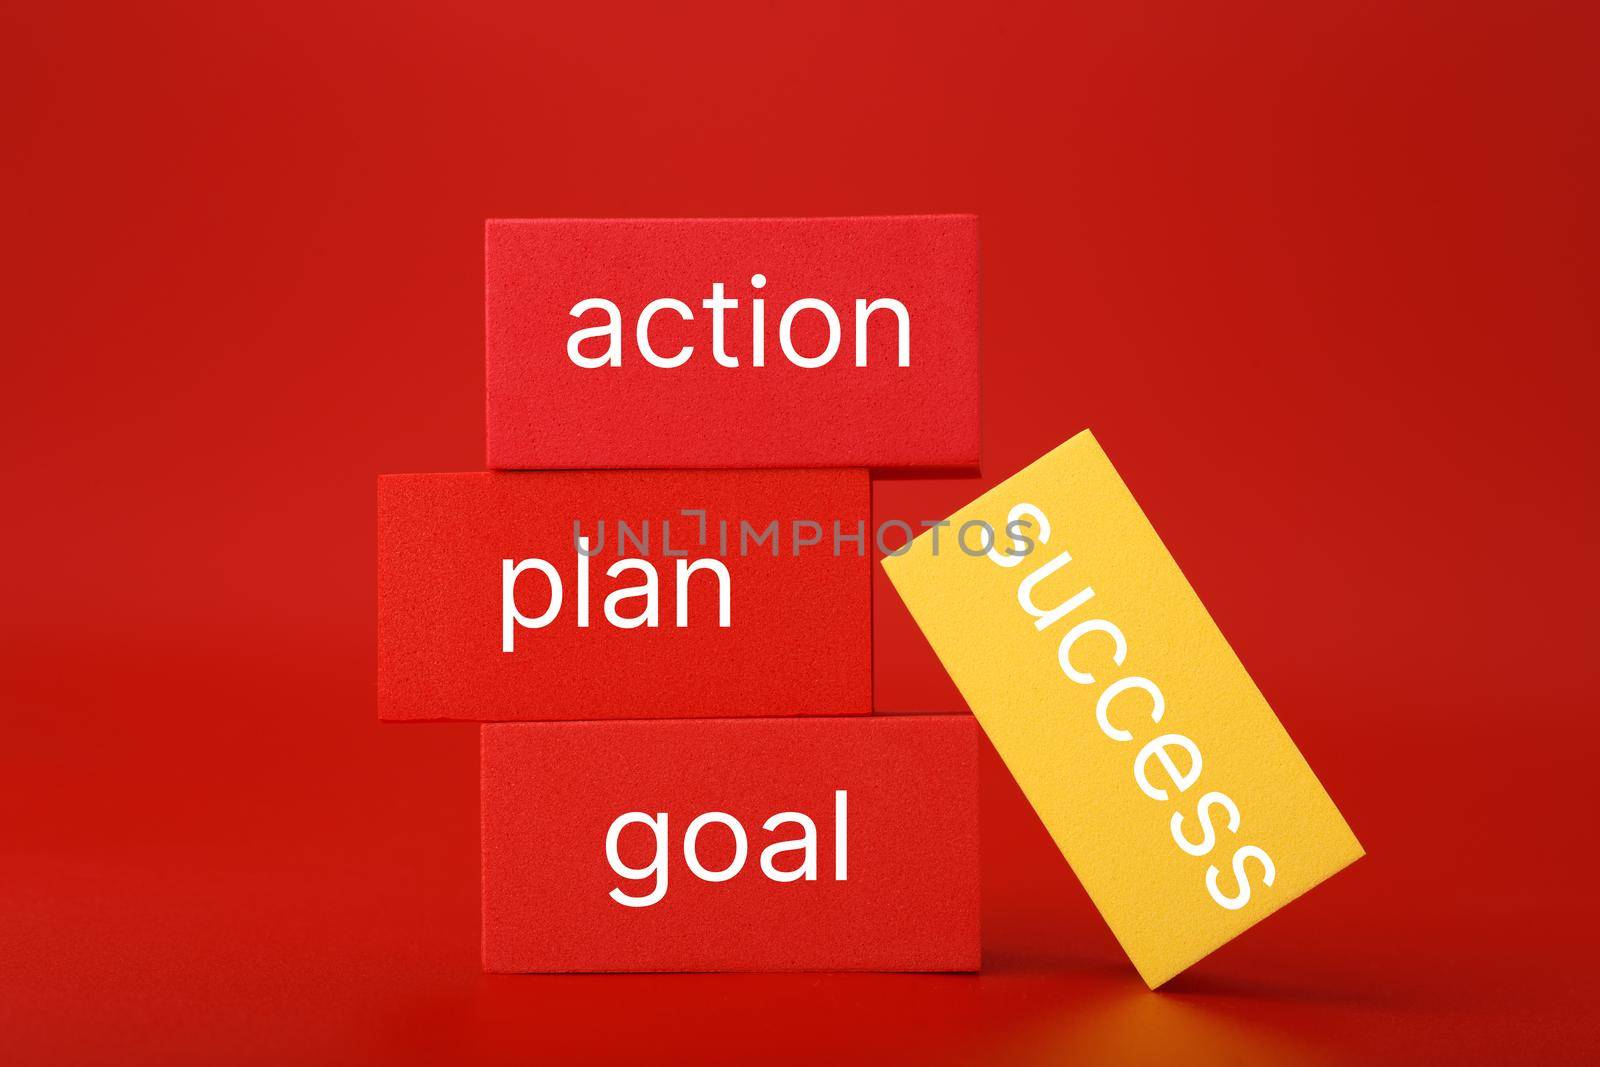 Success formula or strategy concept in red colors. Goal, plan, action written on red and yellow rectangles against red background by Senorina_Irina